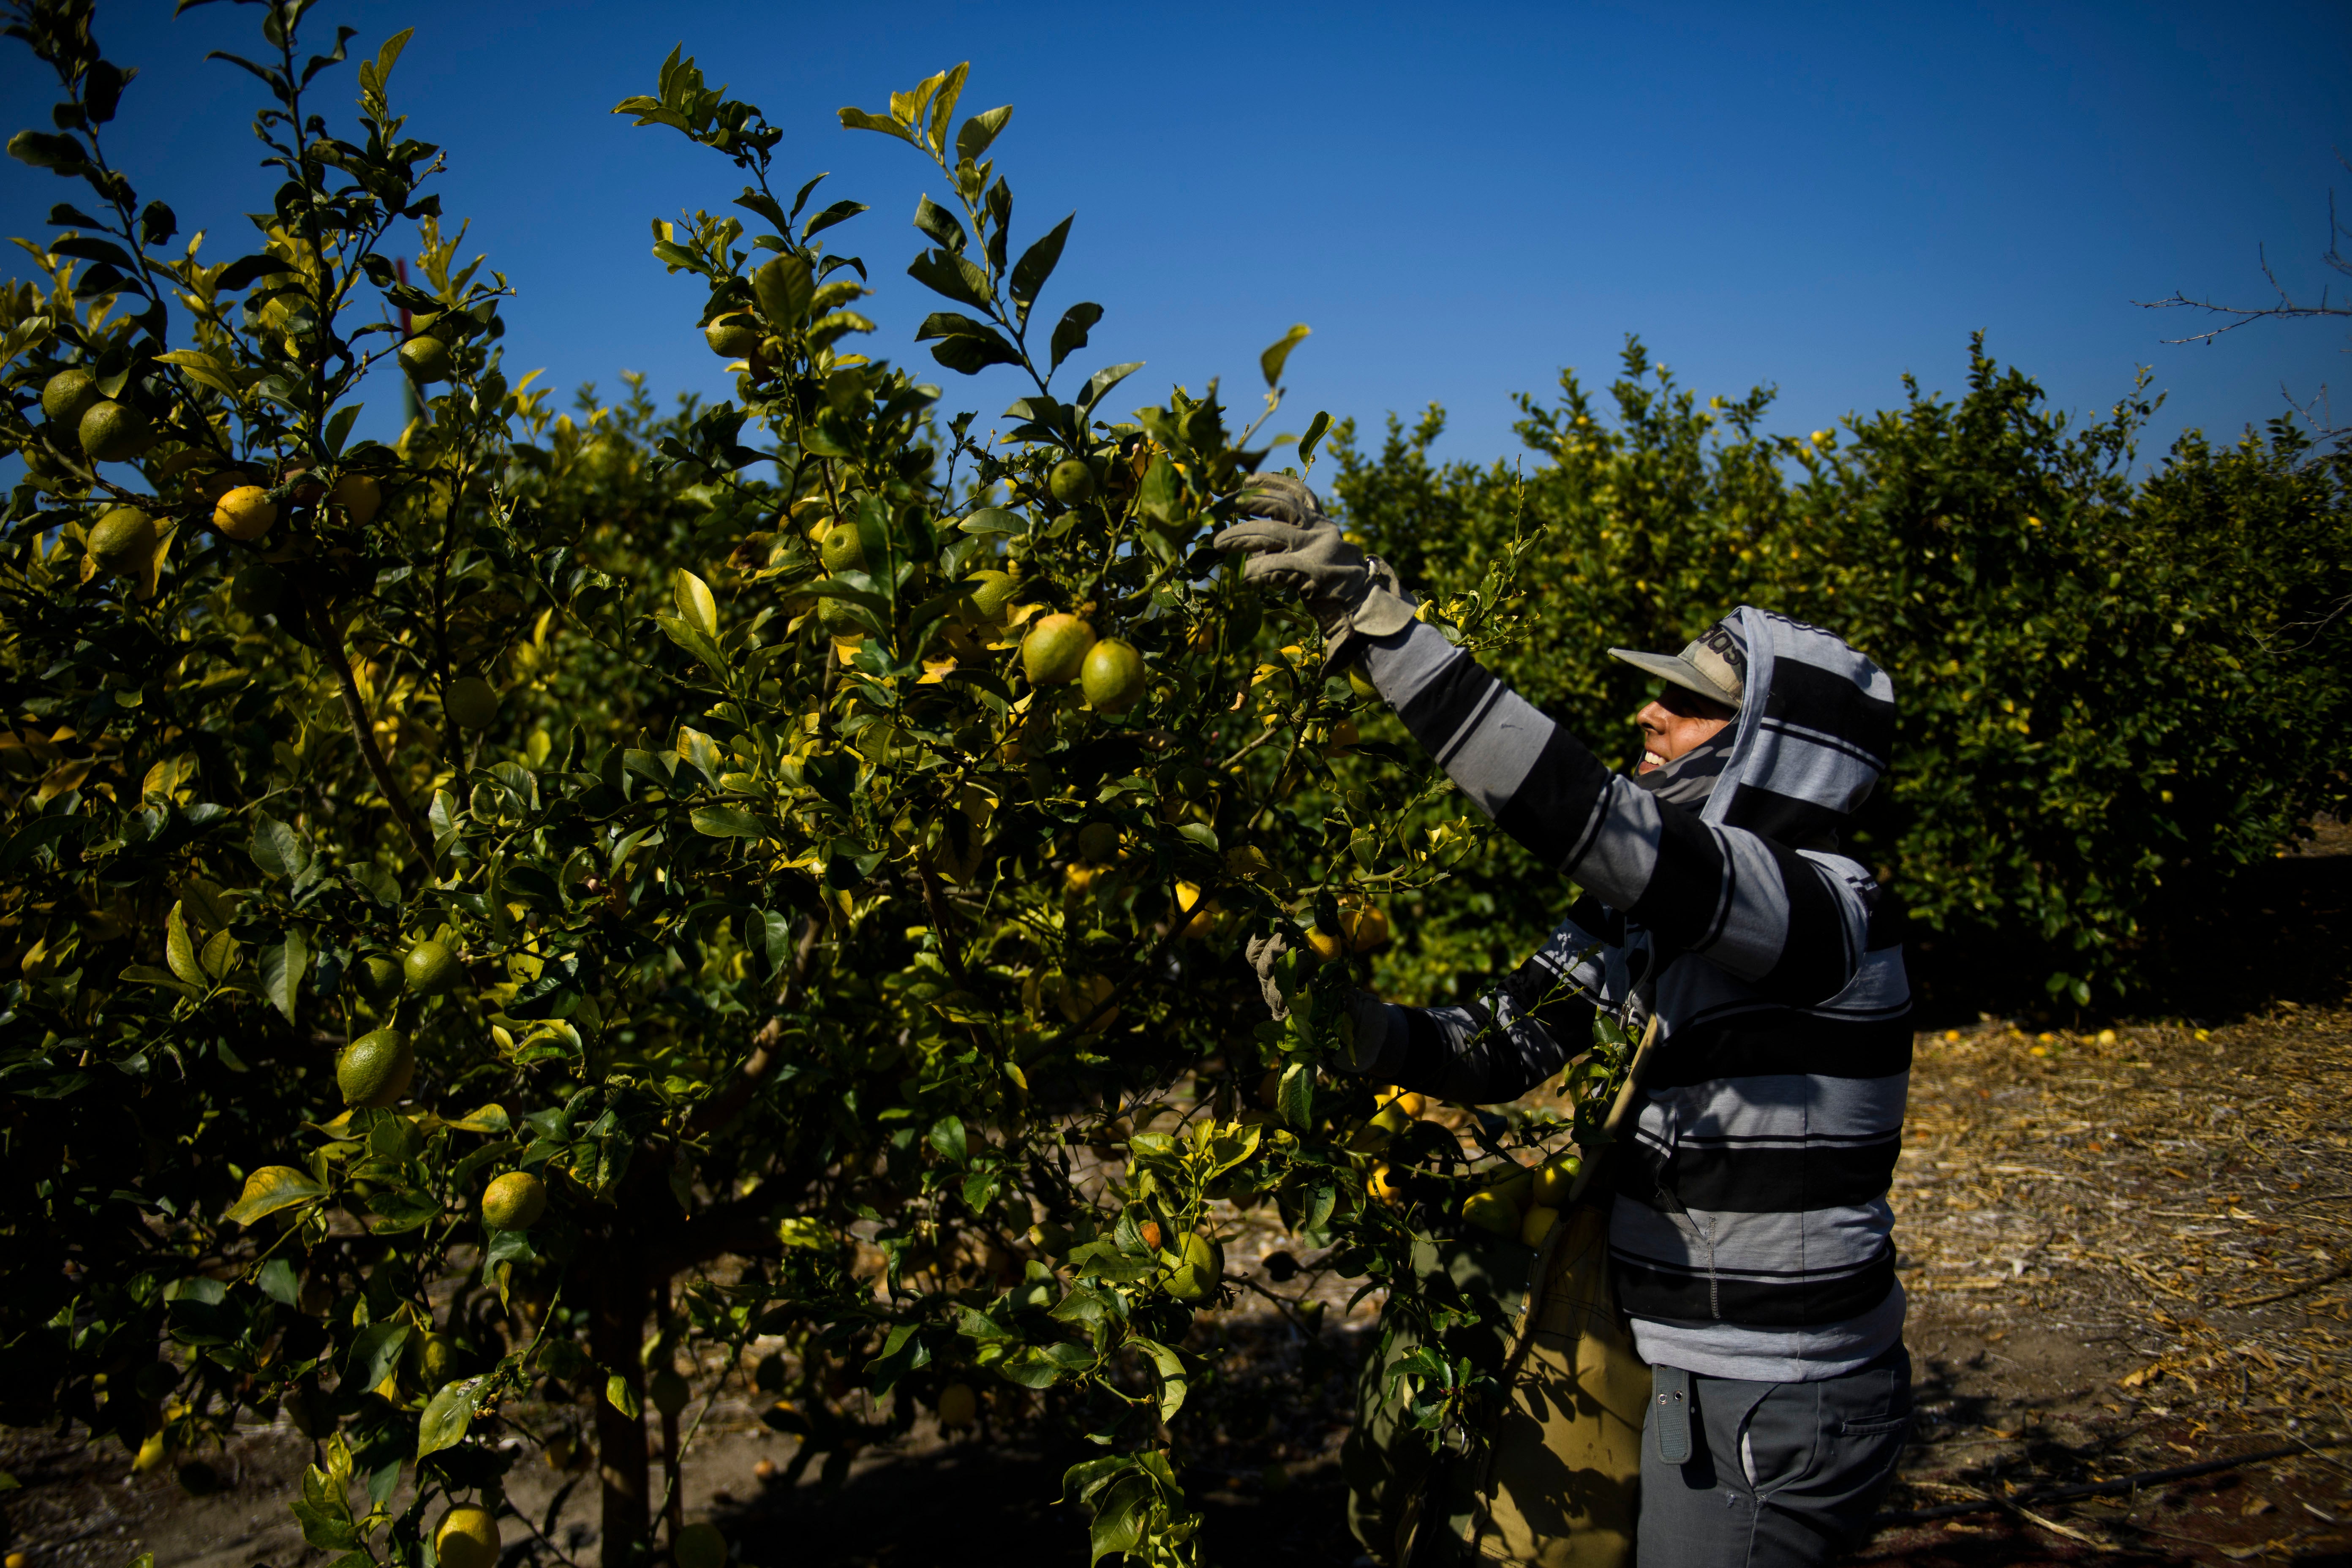 A farm worker harvests lemons at an orchard in Ventura County, California. The United Farm Workers (UFW) union is urging state and local governments to greater prioritise Covid-19 vaccines for farm workers and perform outreach activities to help workers who often lack technology access to sign up for vaccinations